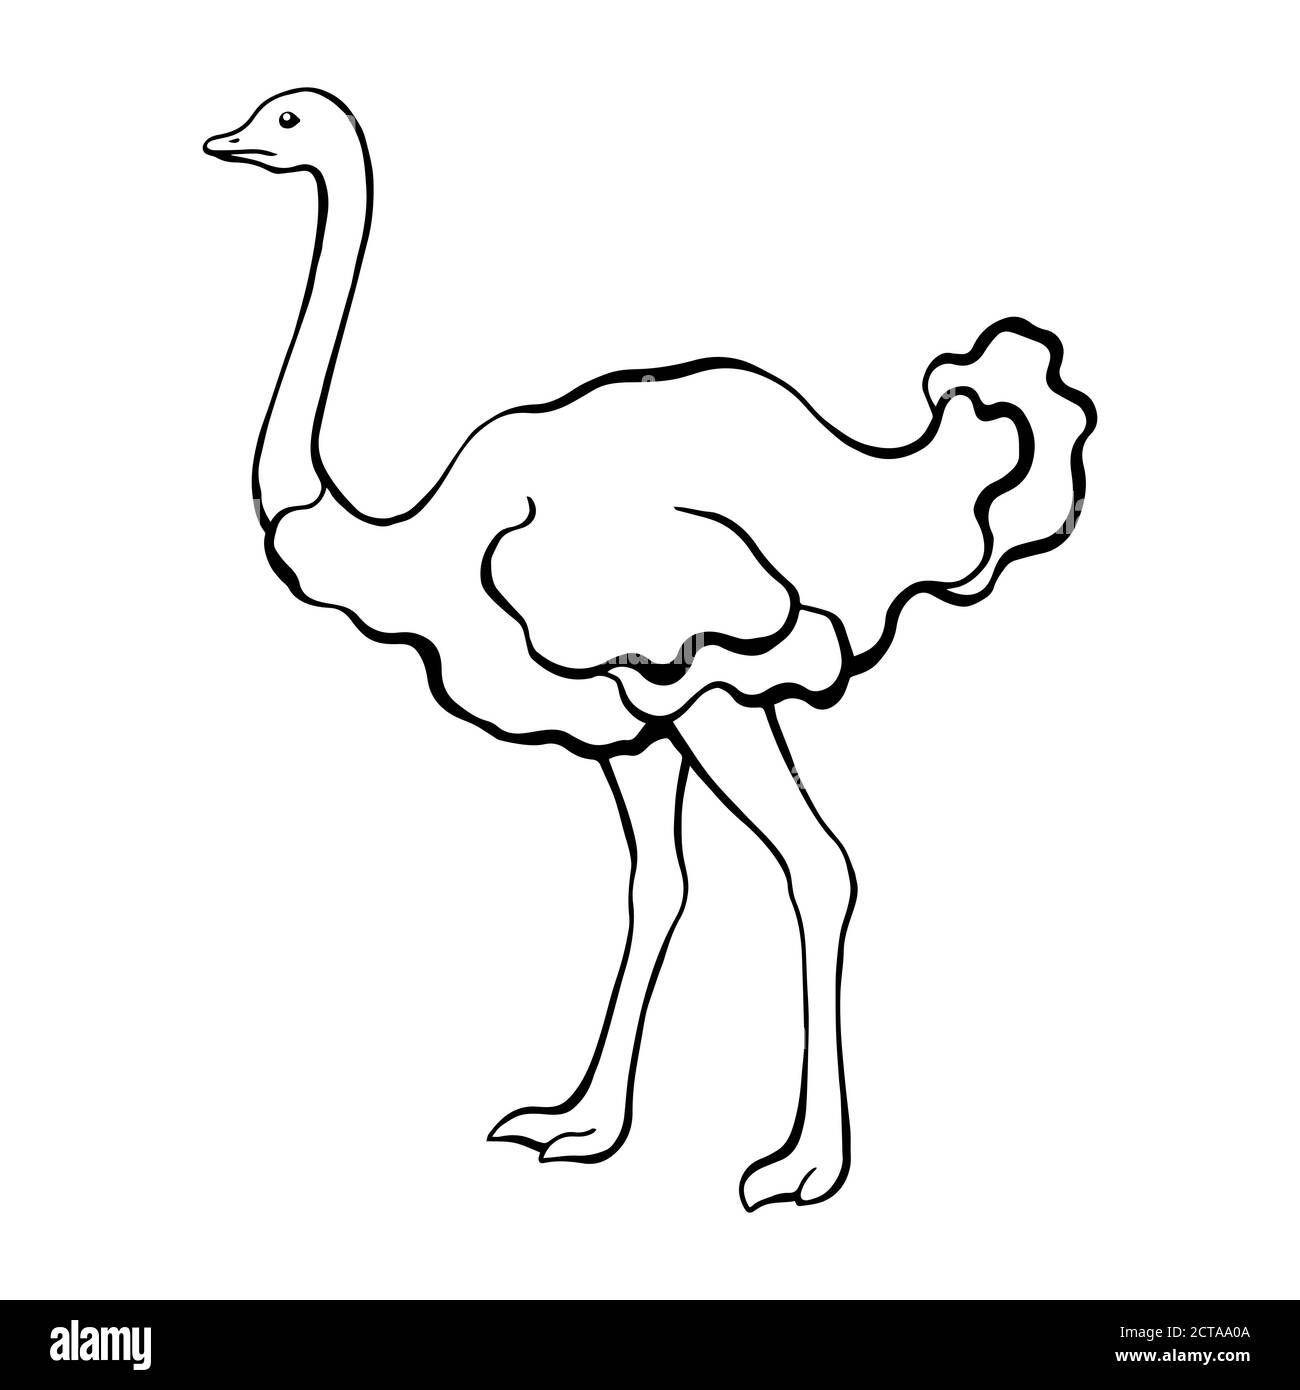 Ostrich bird black white sketch isolated illustration vector Stock Vector